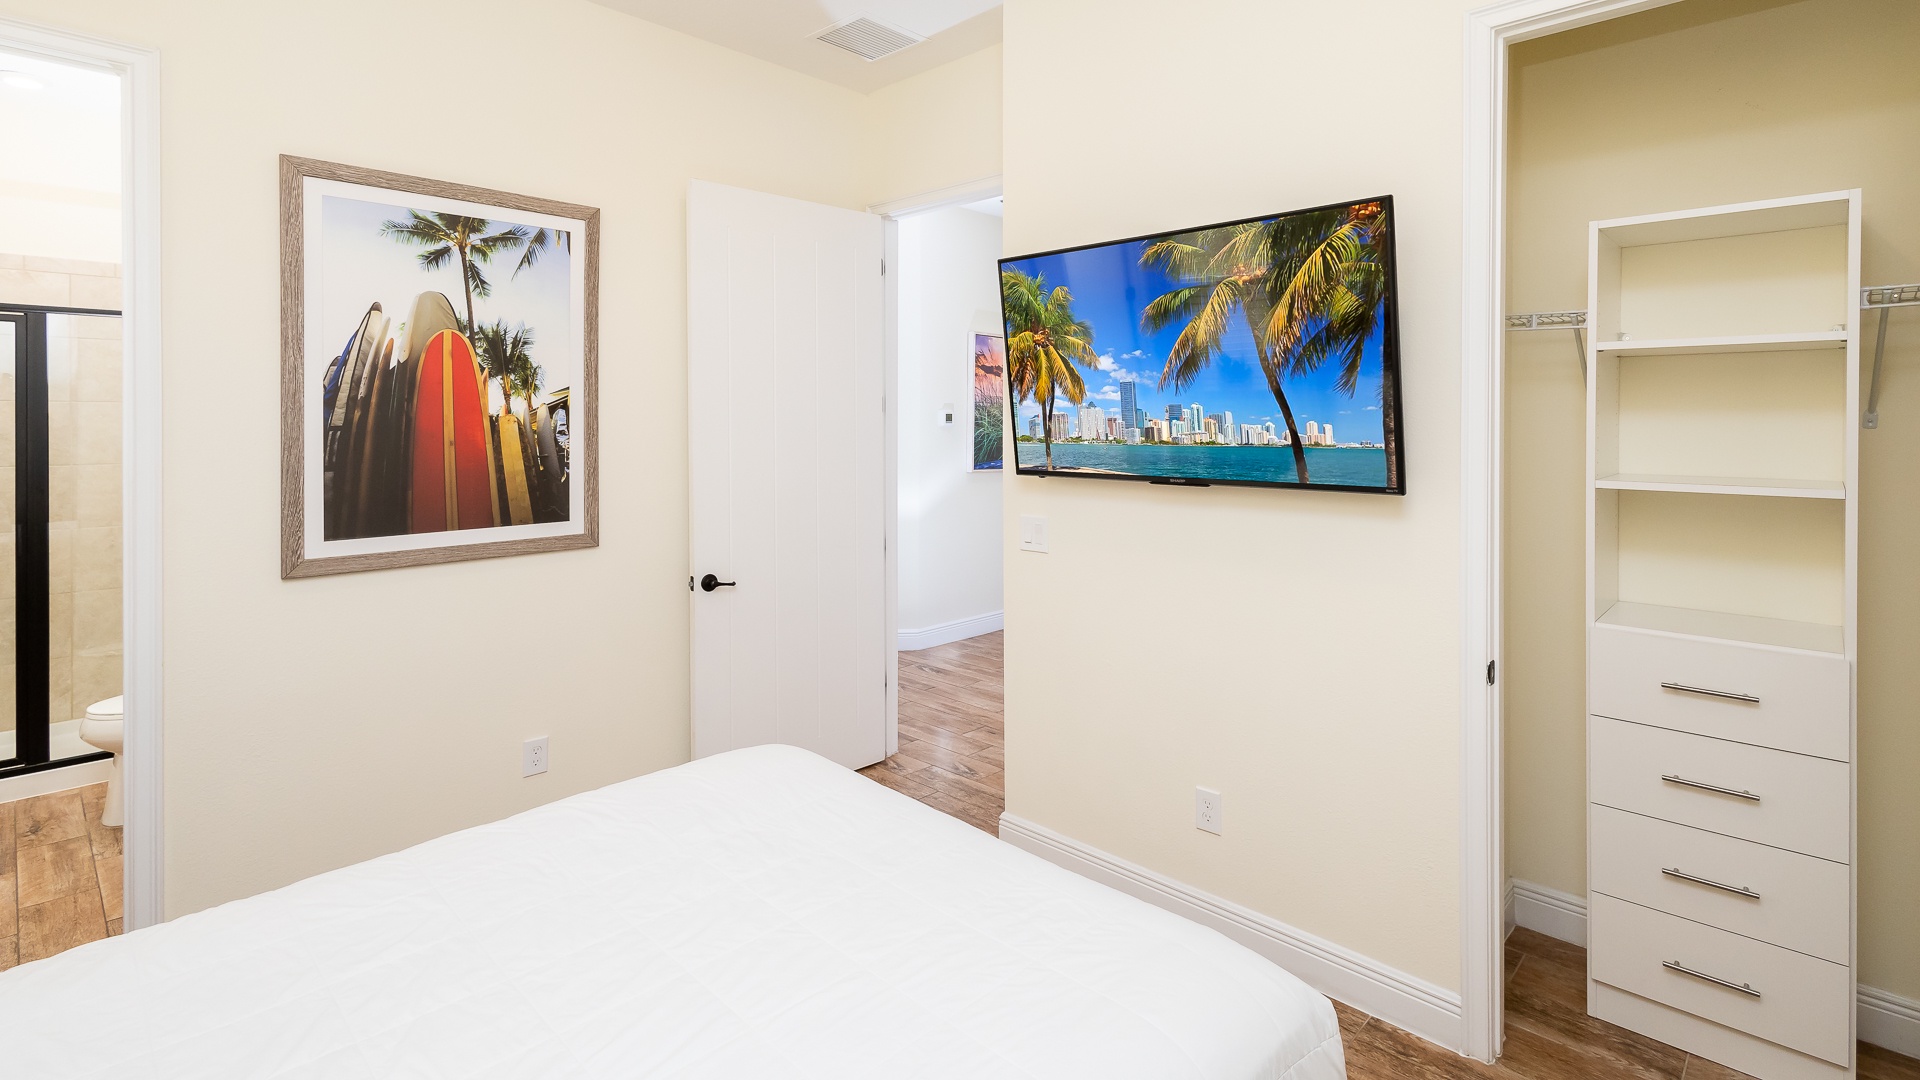 This serene second-floor full suite offers a private ensuite bath & Smart TV